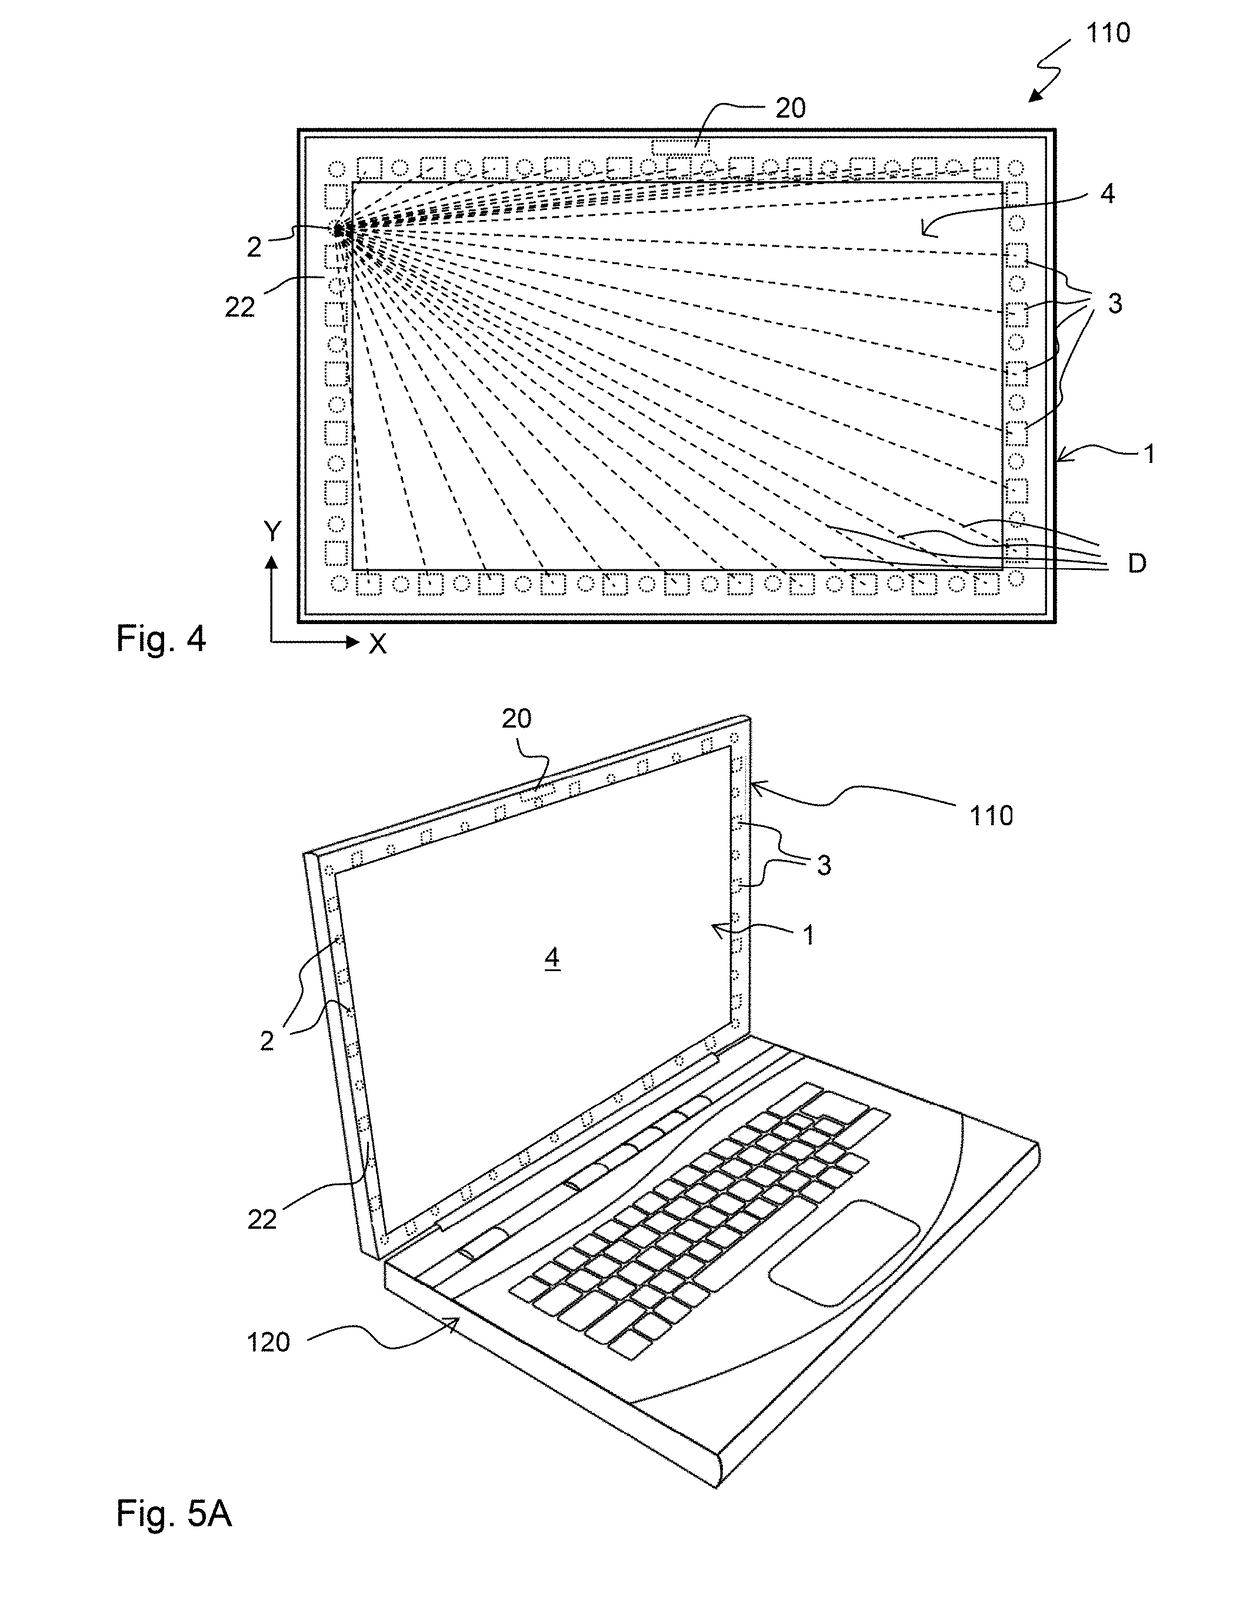 Enhanced interaction touch system